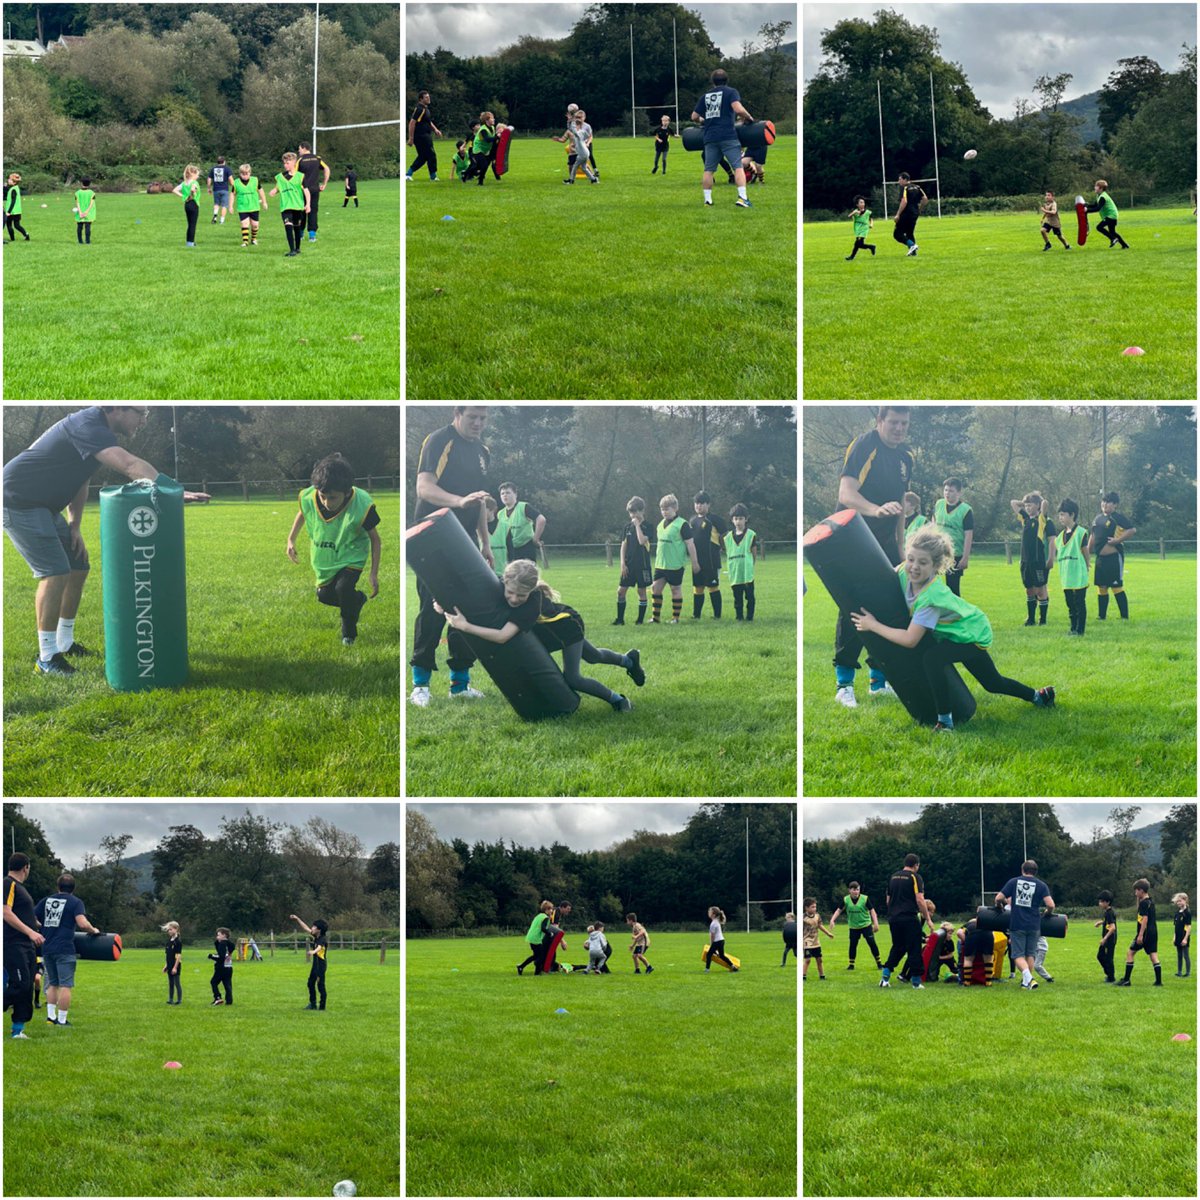 Great training session this morning. Everyone welcome from 4 to 12 years old, Sunday 10am. Contact us for further details. #avonminis #bath #Rugby